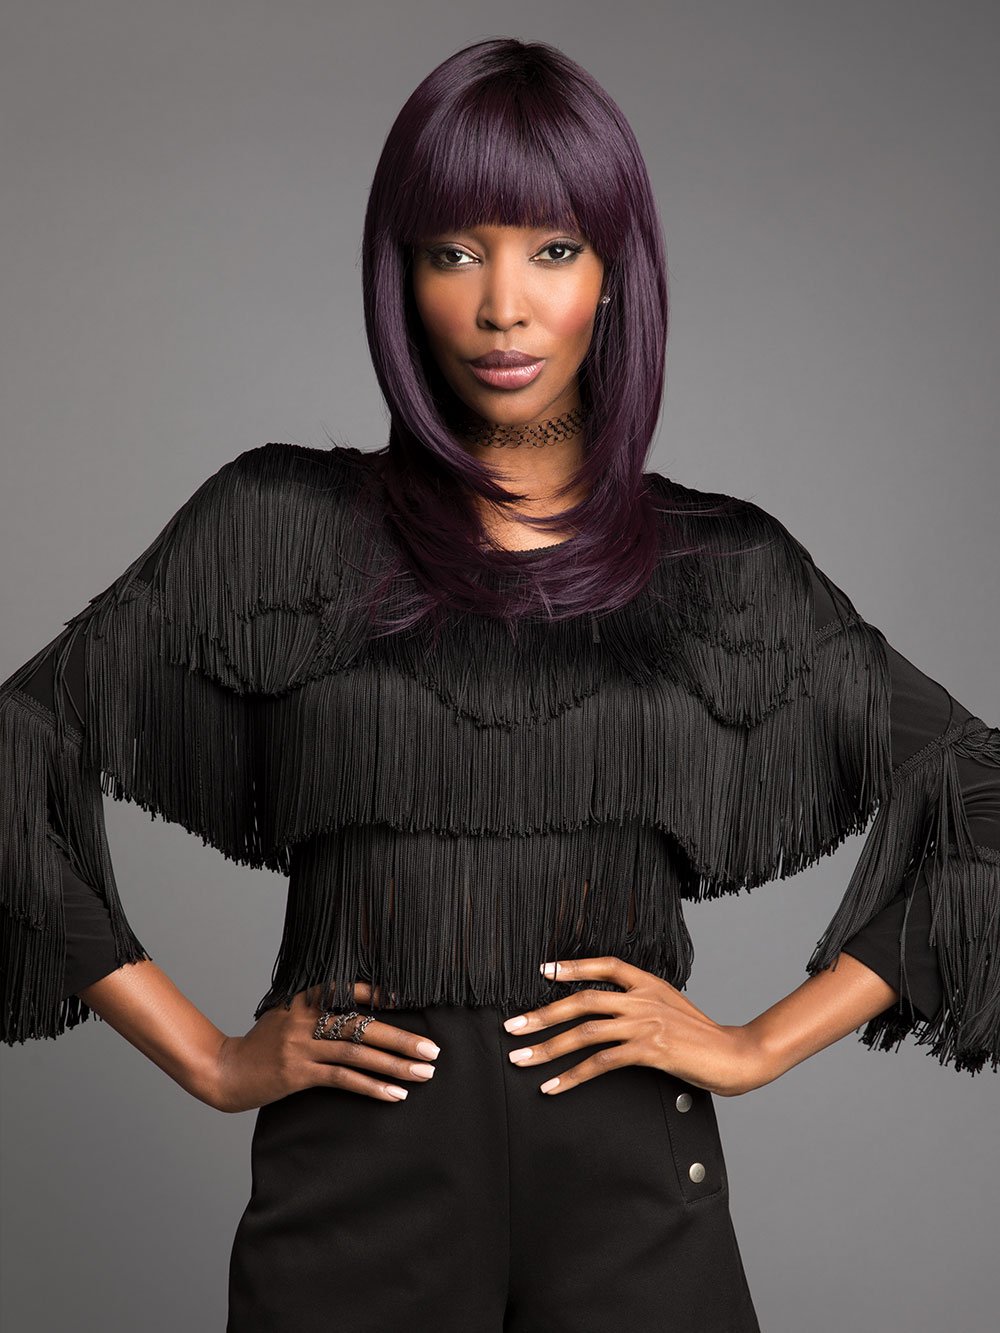 The Spellbound Synthetic Wig by Revlon Bold is a beautifully long layered style